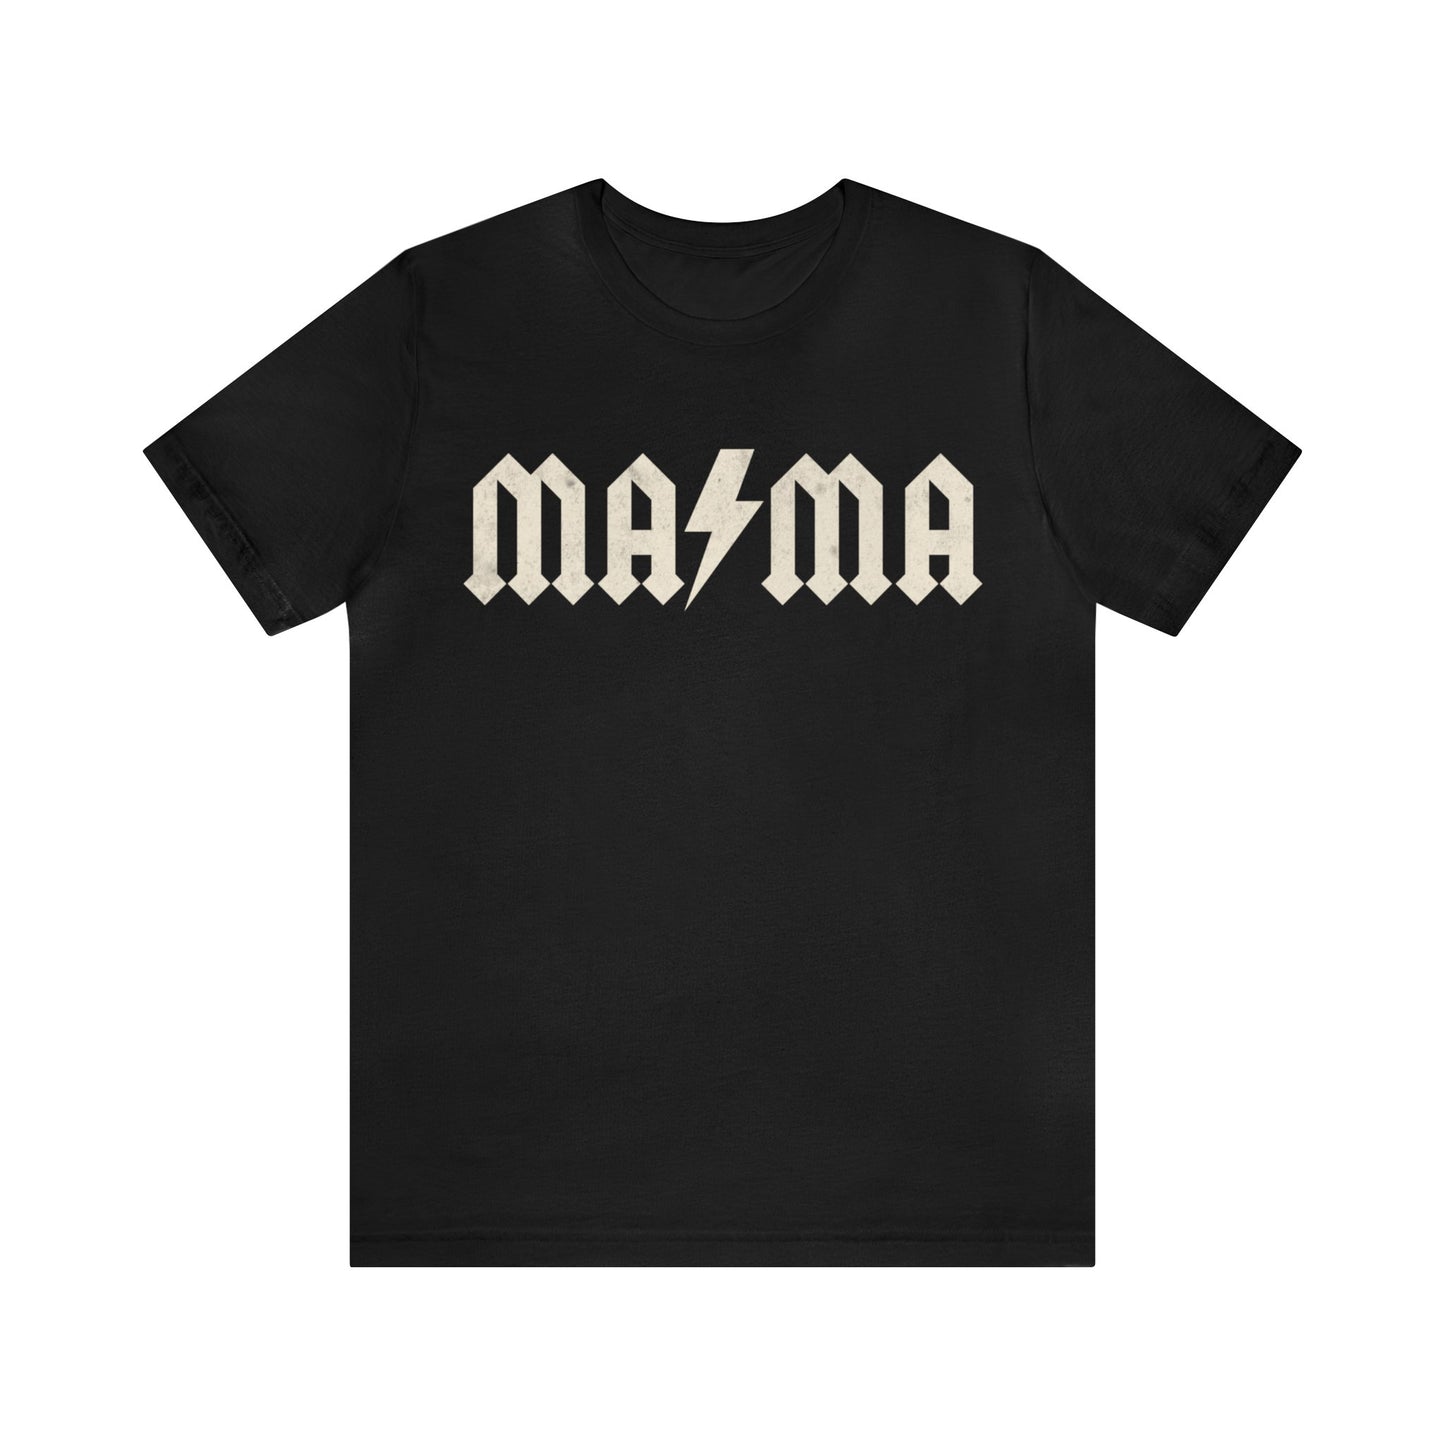 Retro Mama Checkered Shirt, Mom Shirt, Mothers Day Gift, Retro Mama Shirt, Best Mama Shirt from Daughter, Gift for Best Mom, T1156